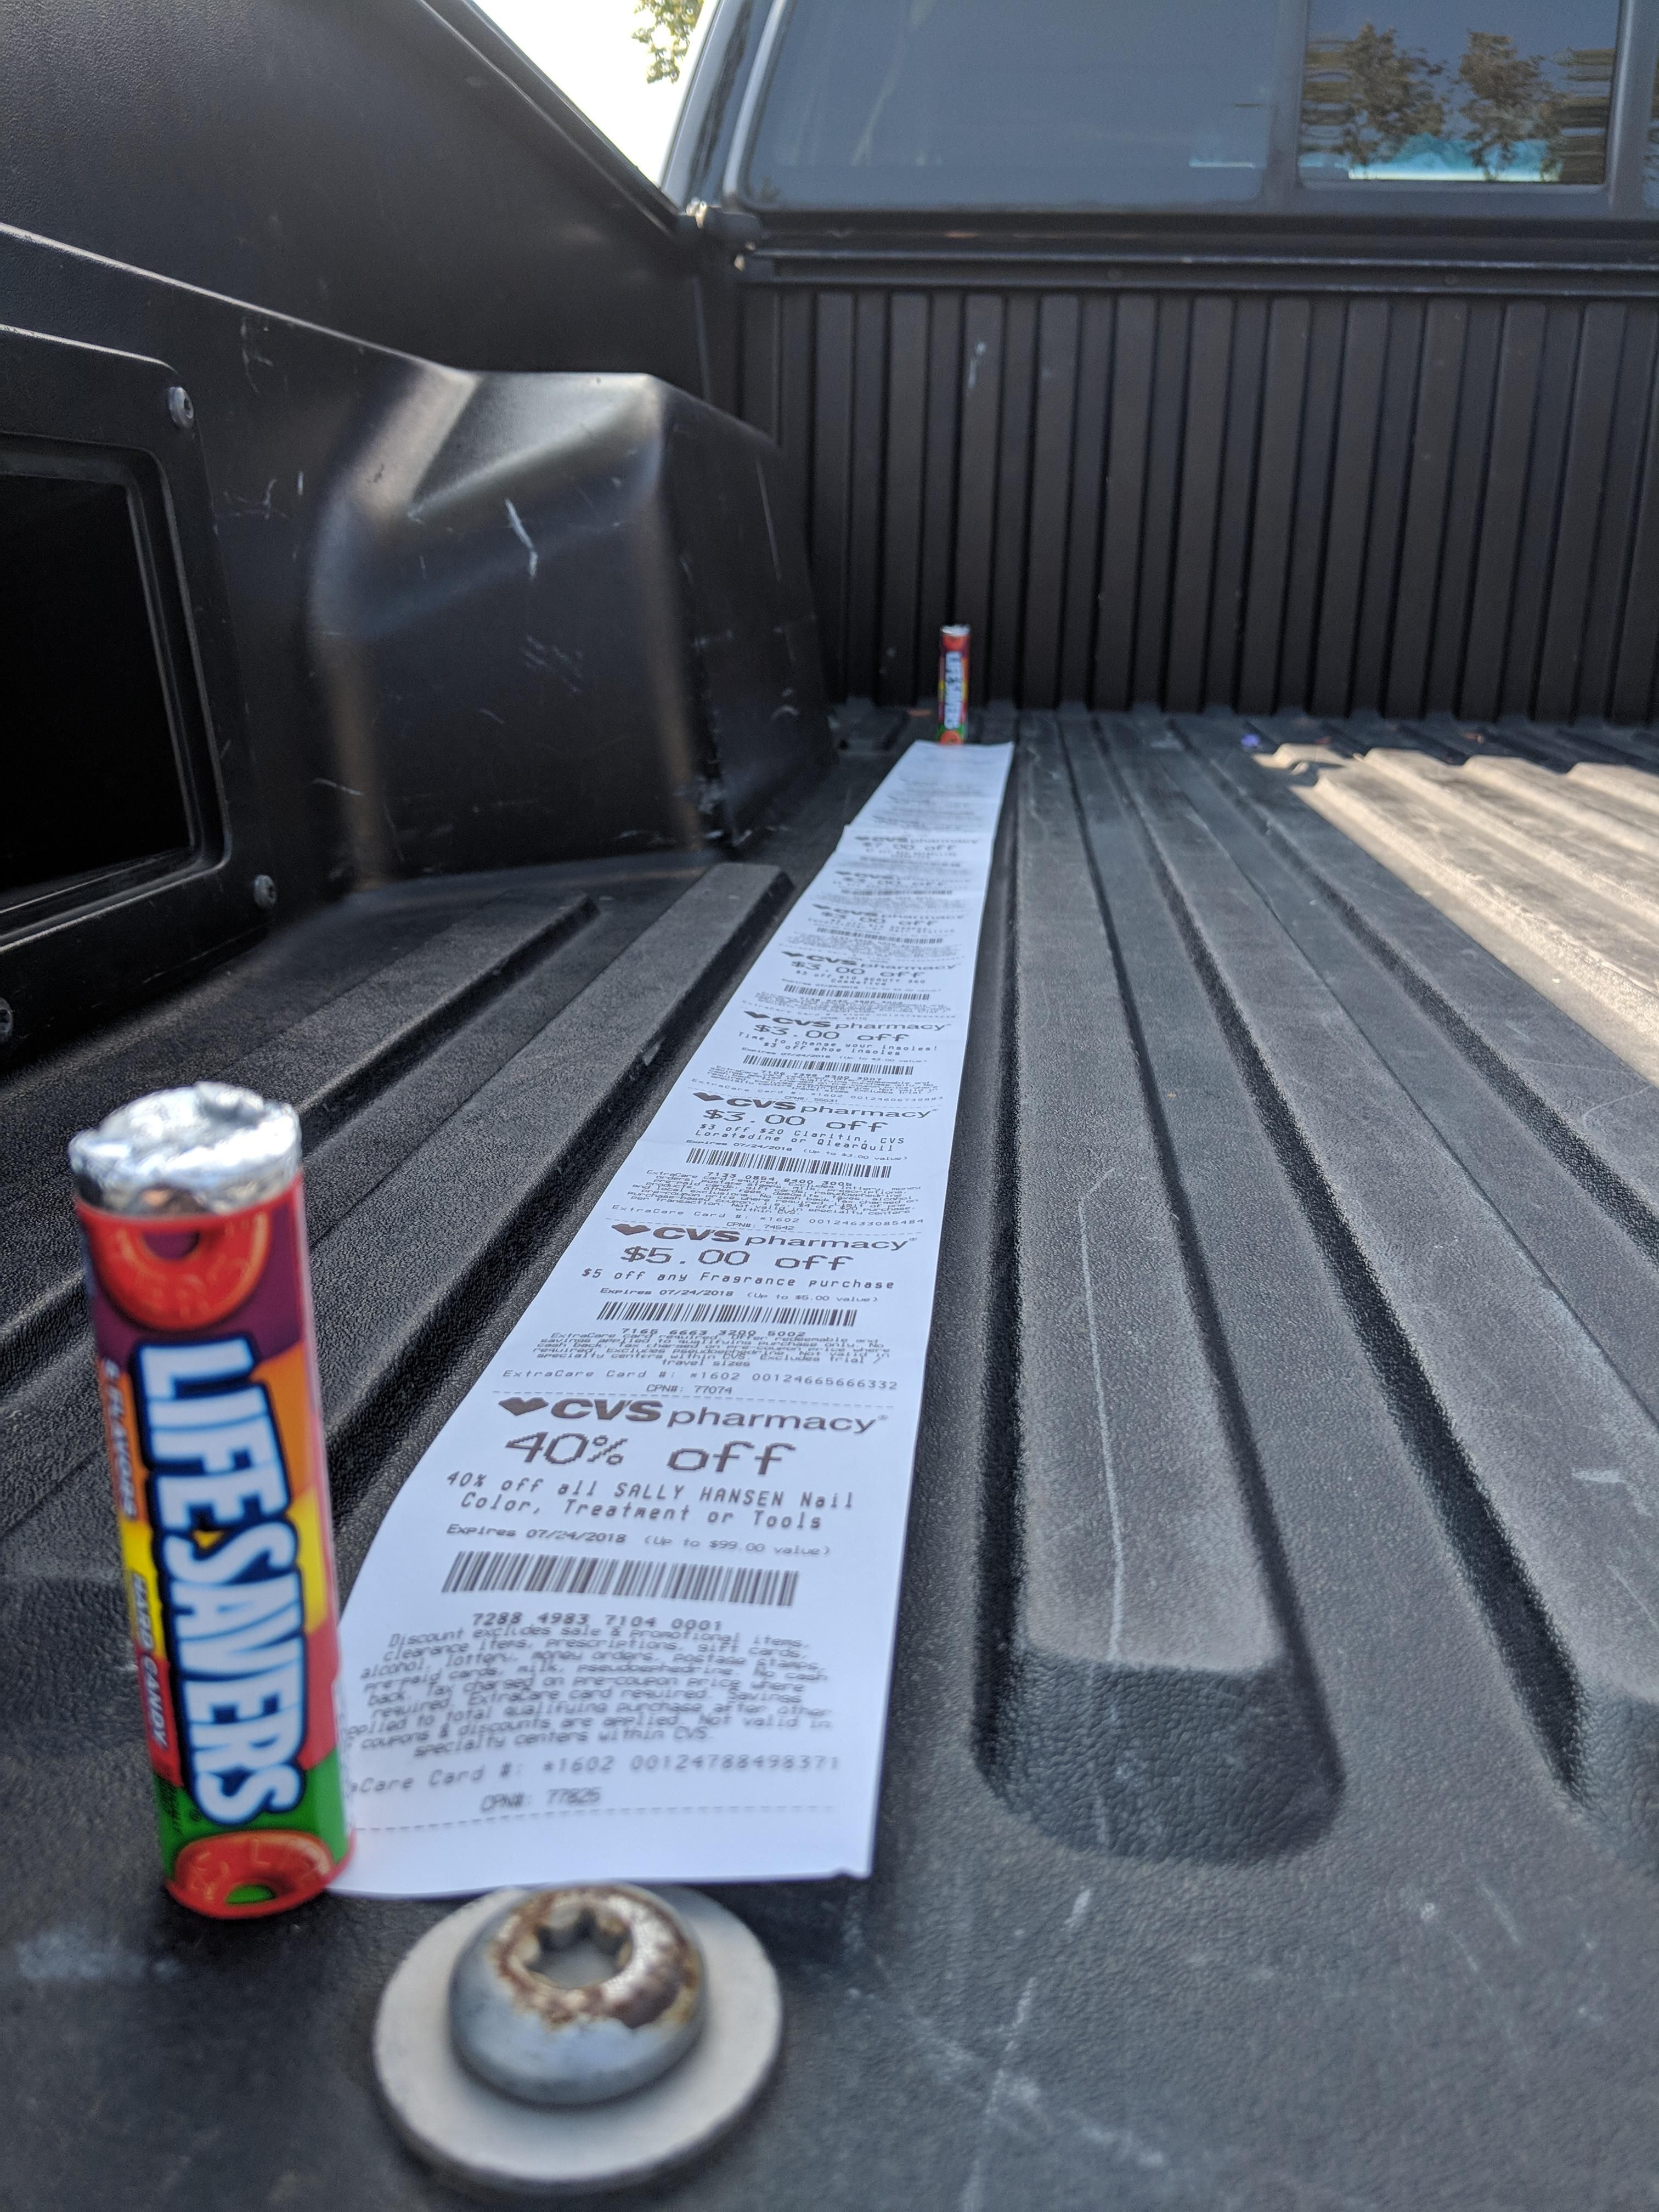 Bought 2 Lifesavers at CVS and the receipt was almost as long as my truck bed